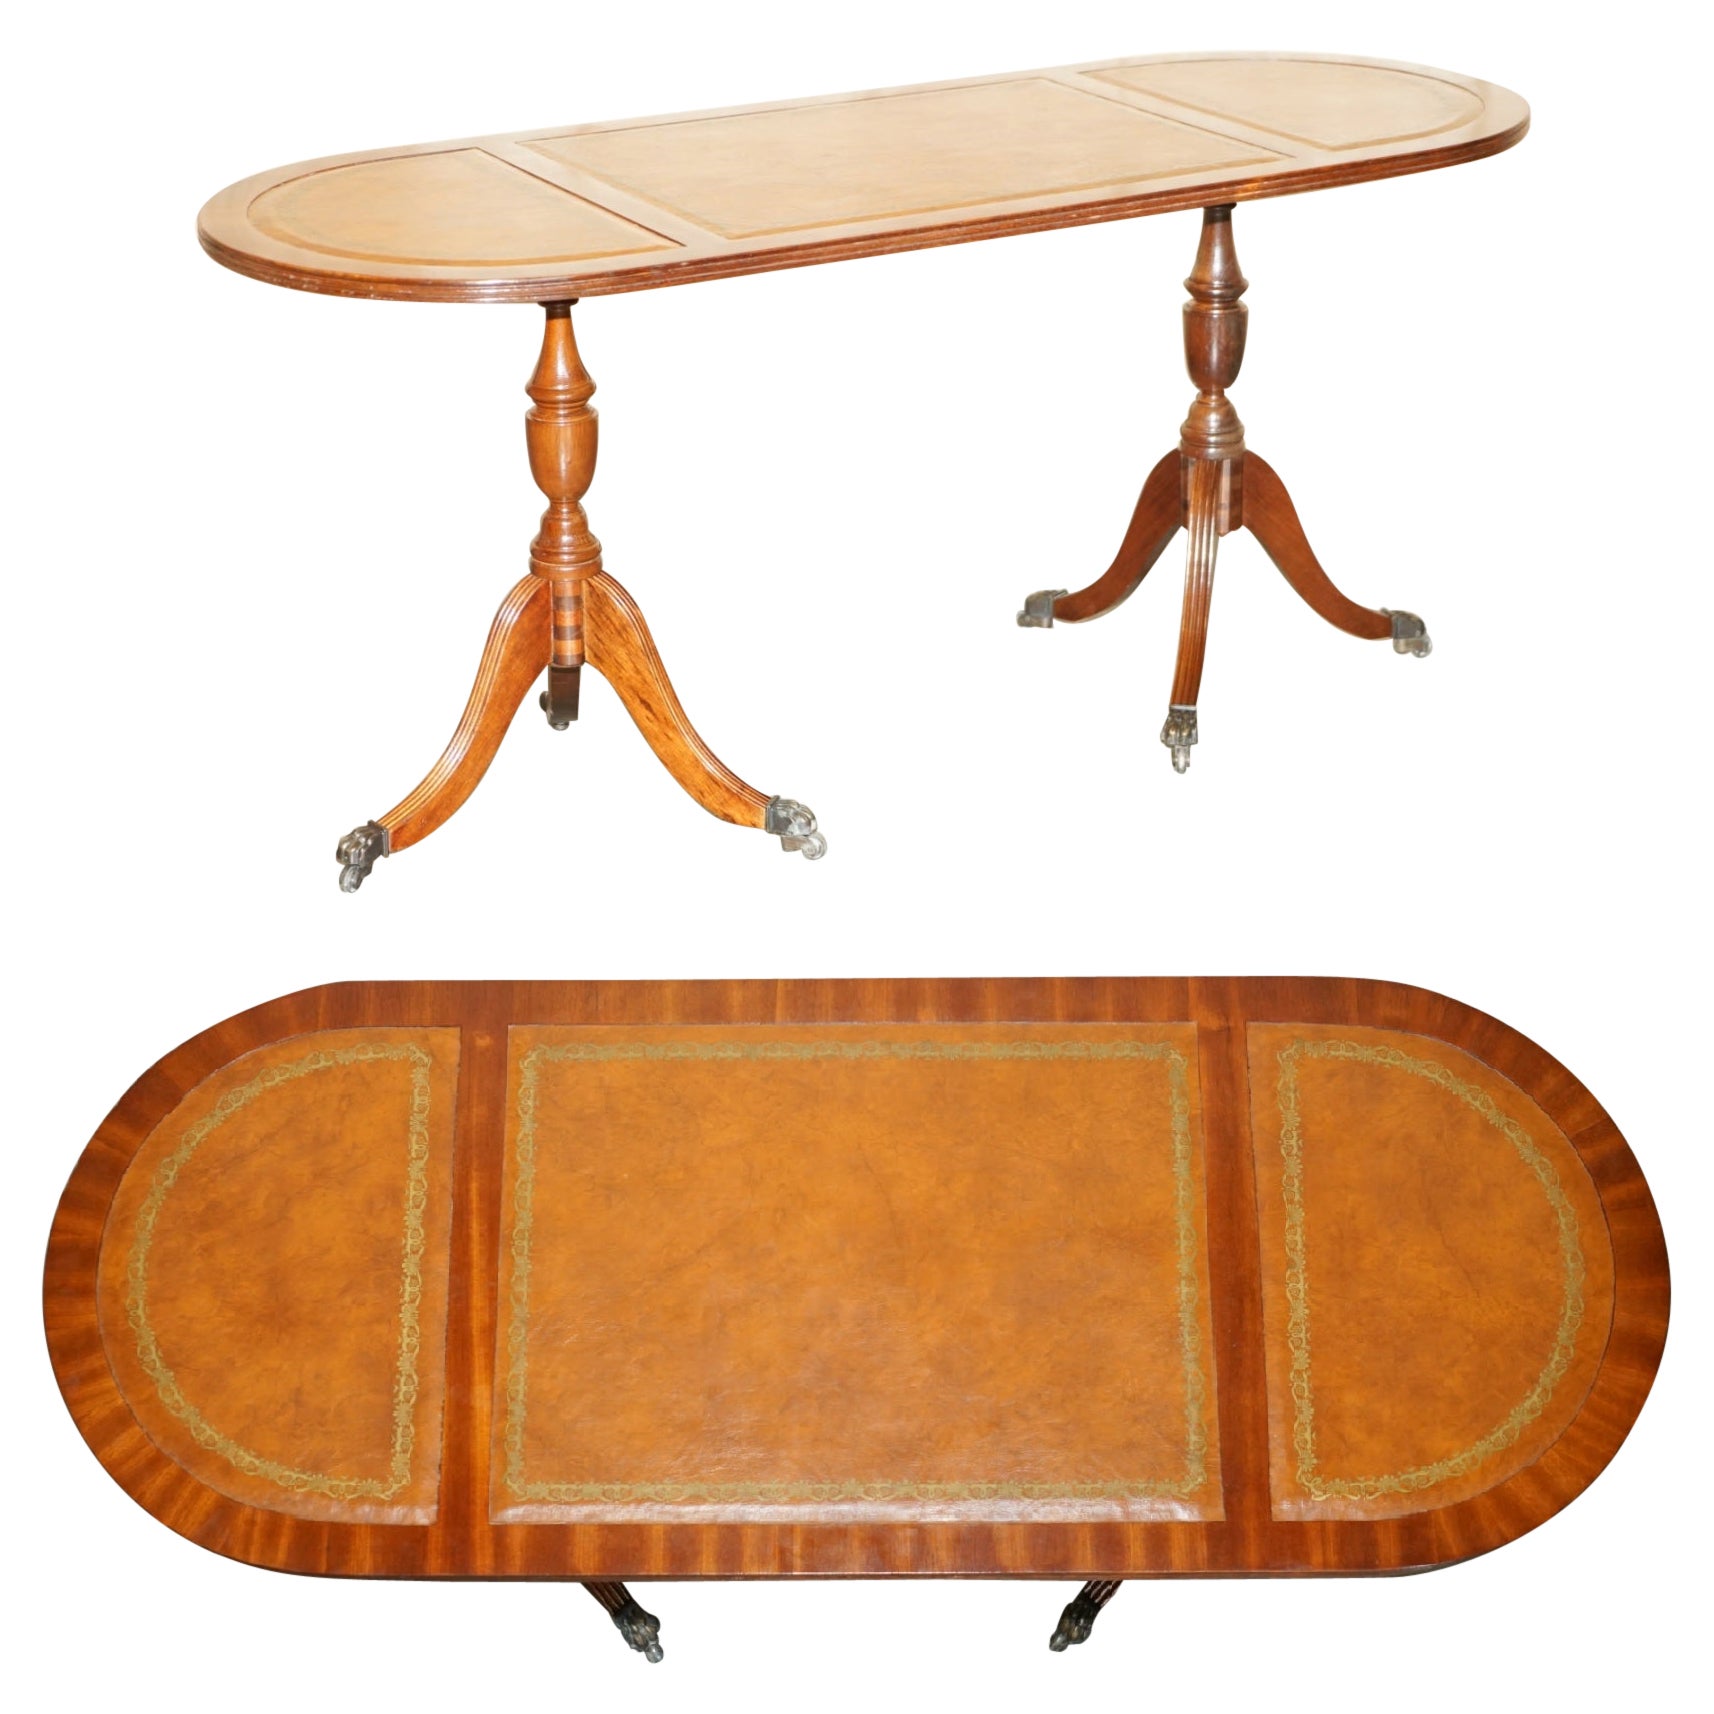 ViNTAGE HANDDYED AND AGED BROWN LEATHER OVAL COFFEE-TABLE MIT LION CASTORS im Angebot